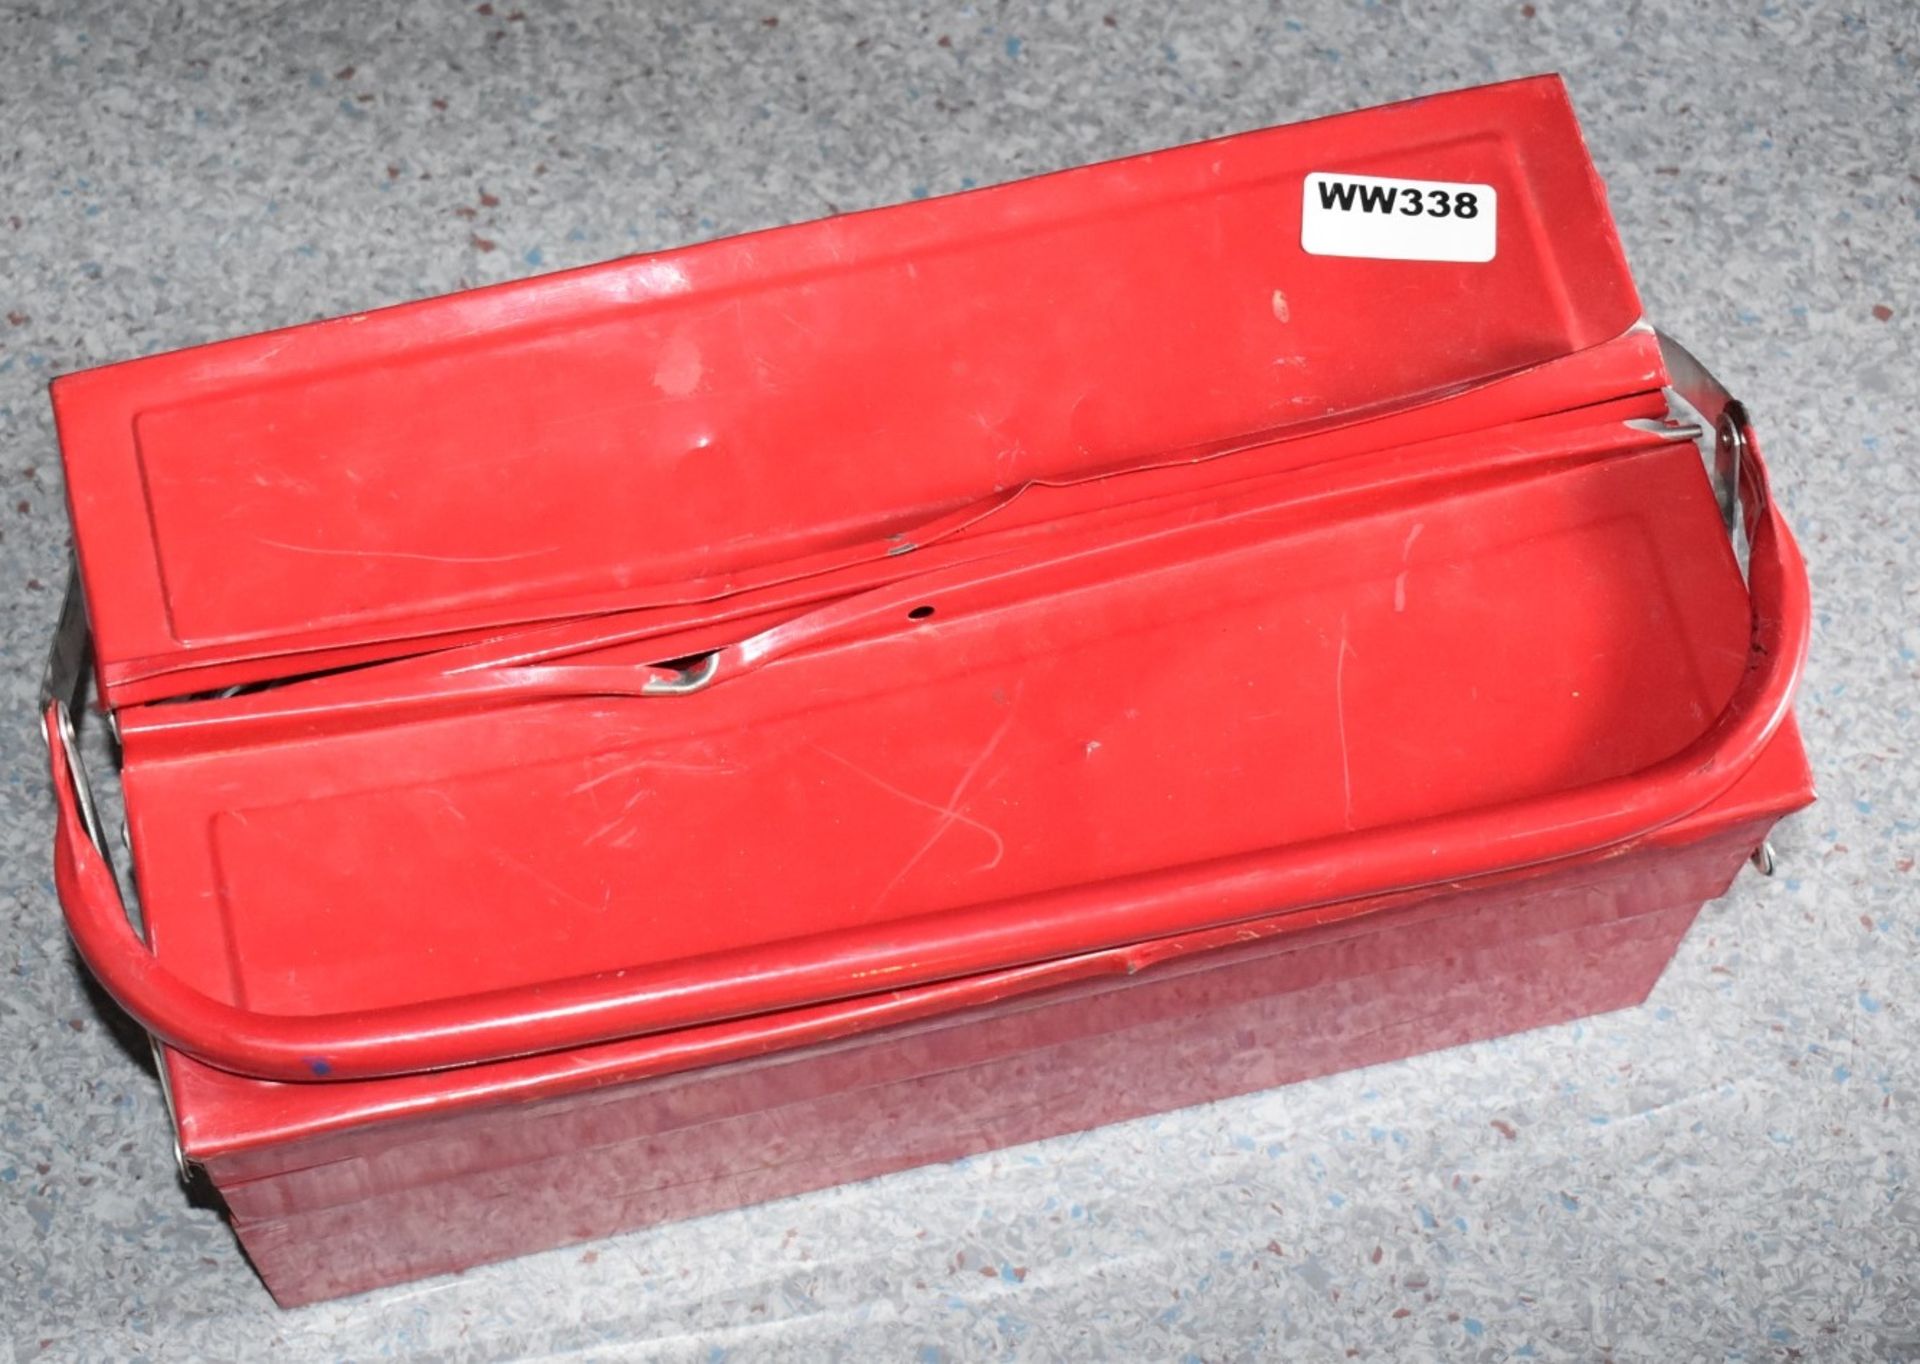 1 x Toolbox With Contents - Ref WW338 - CL520 - Location: London W10 More pictures, information - Image 2 of 2